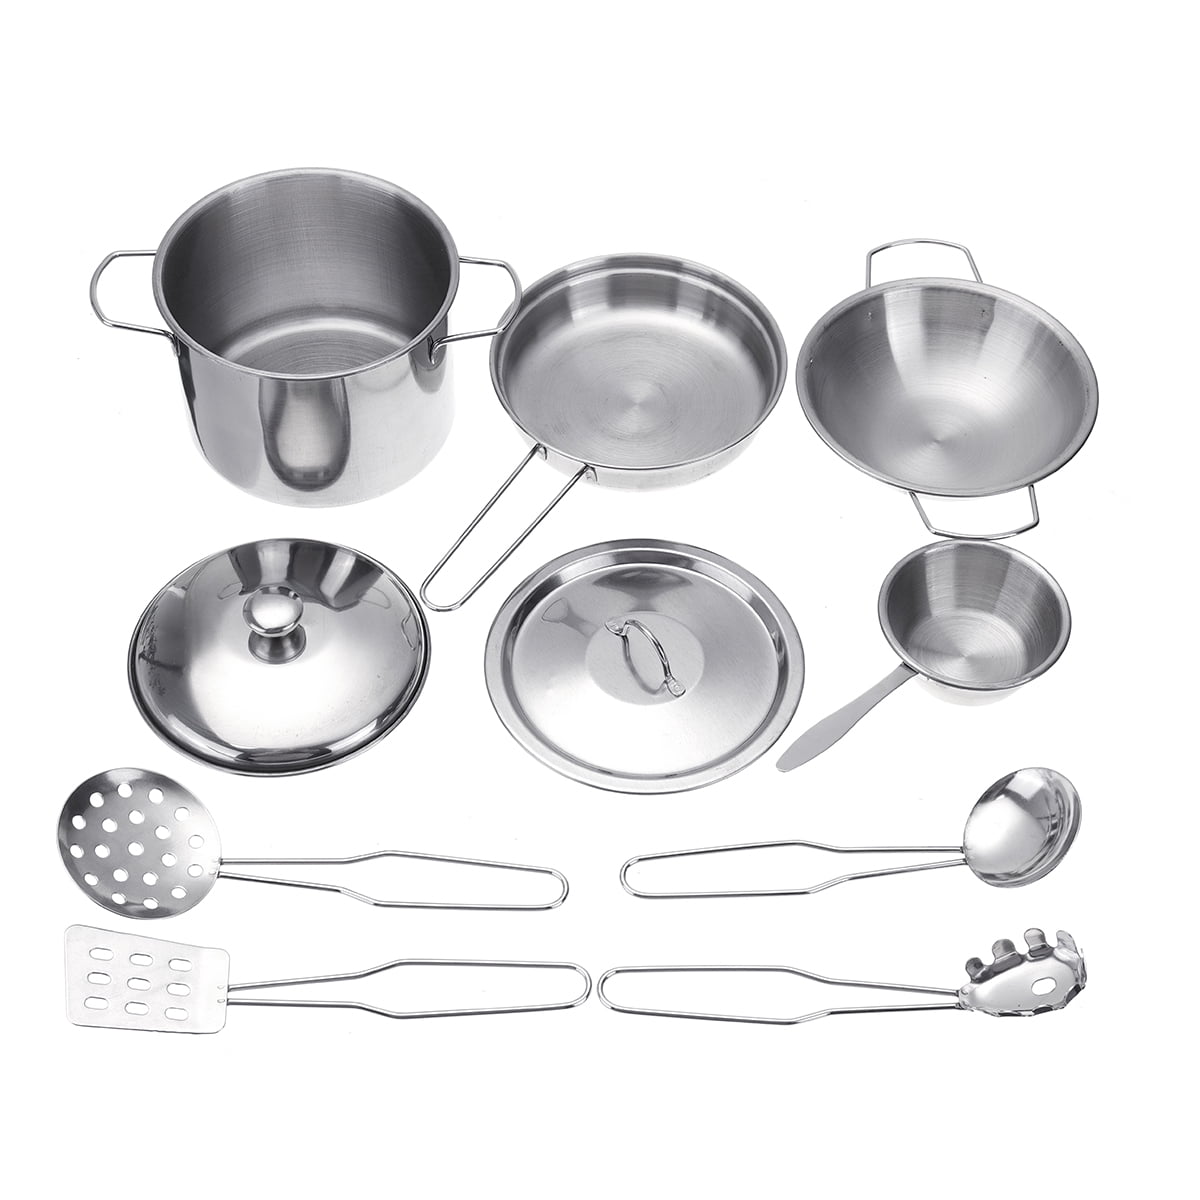 Stainless Steel Cookware Set D 10pcs Kids Pretend Play Kitchen Cooking Toys Pots & Assorted Cooking Utensils Pans 